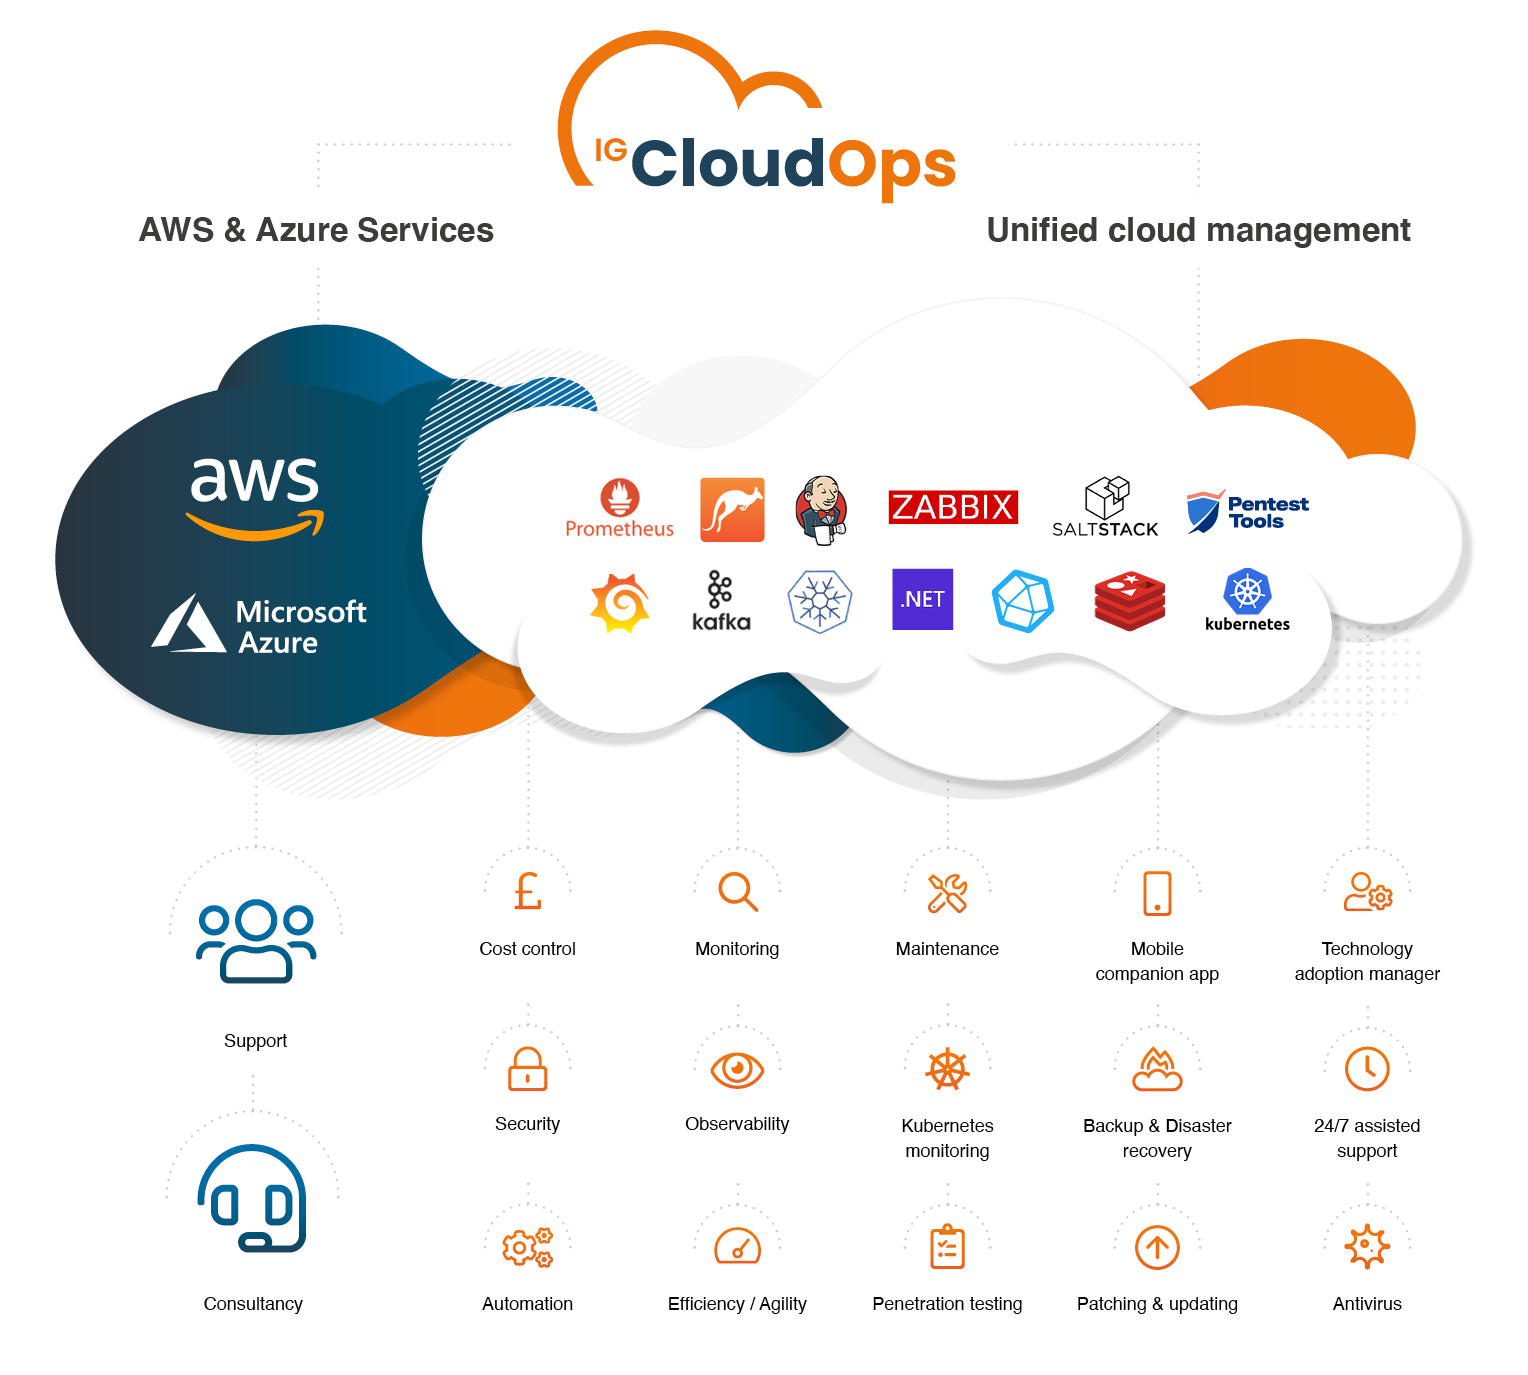 IG CloudOps Overview